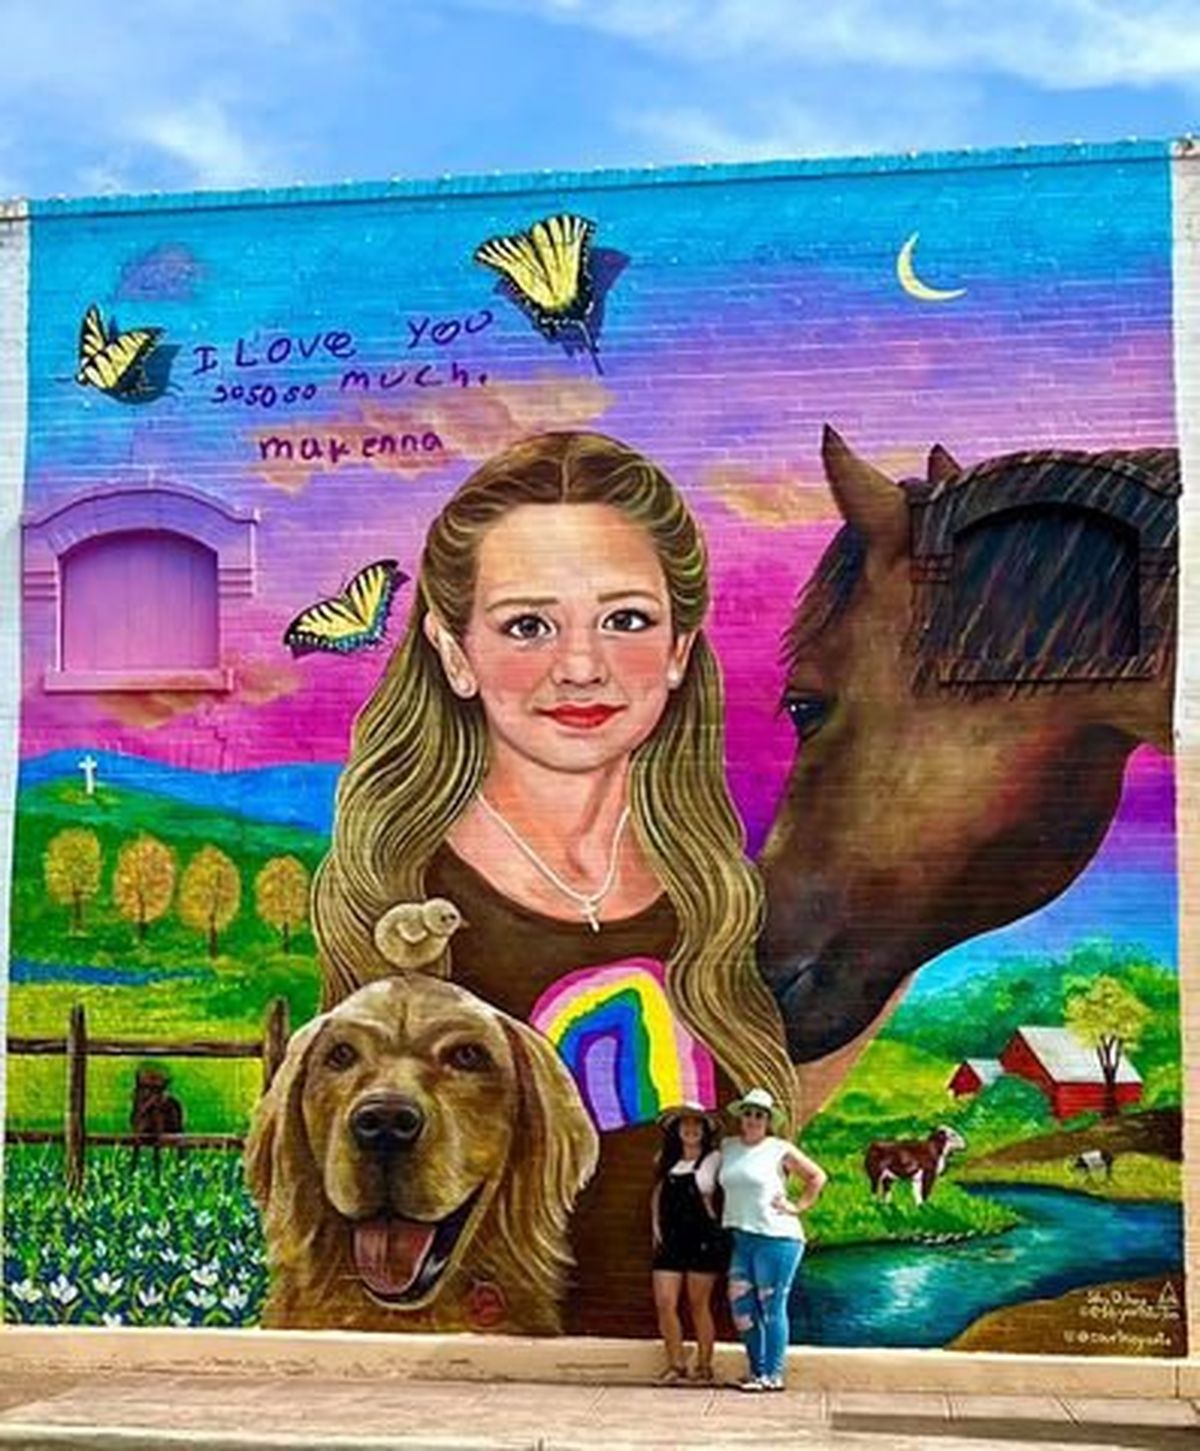 Artist Silvy Ochoa and her assignment partner pose in front of a mural in Uvalde, Texas, honoring 10-year-old Makenna Lee Elrod, who was among the 21 people killed by a gunman at Robb Elementary School in Uvalde in May. MUST CREDIT: Silvy Ochoa photo  (Silvy Ochoa/Handout)